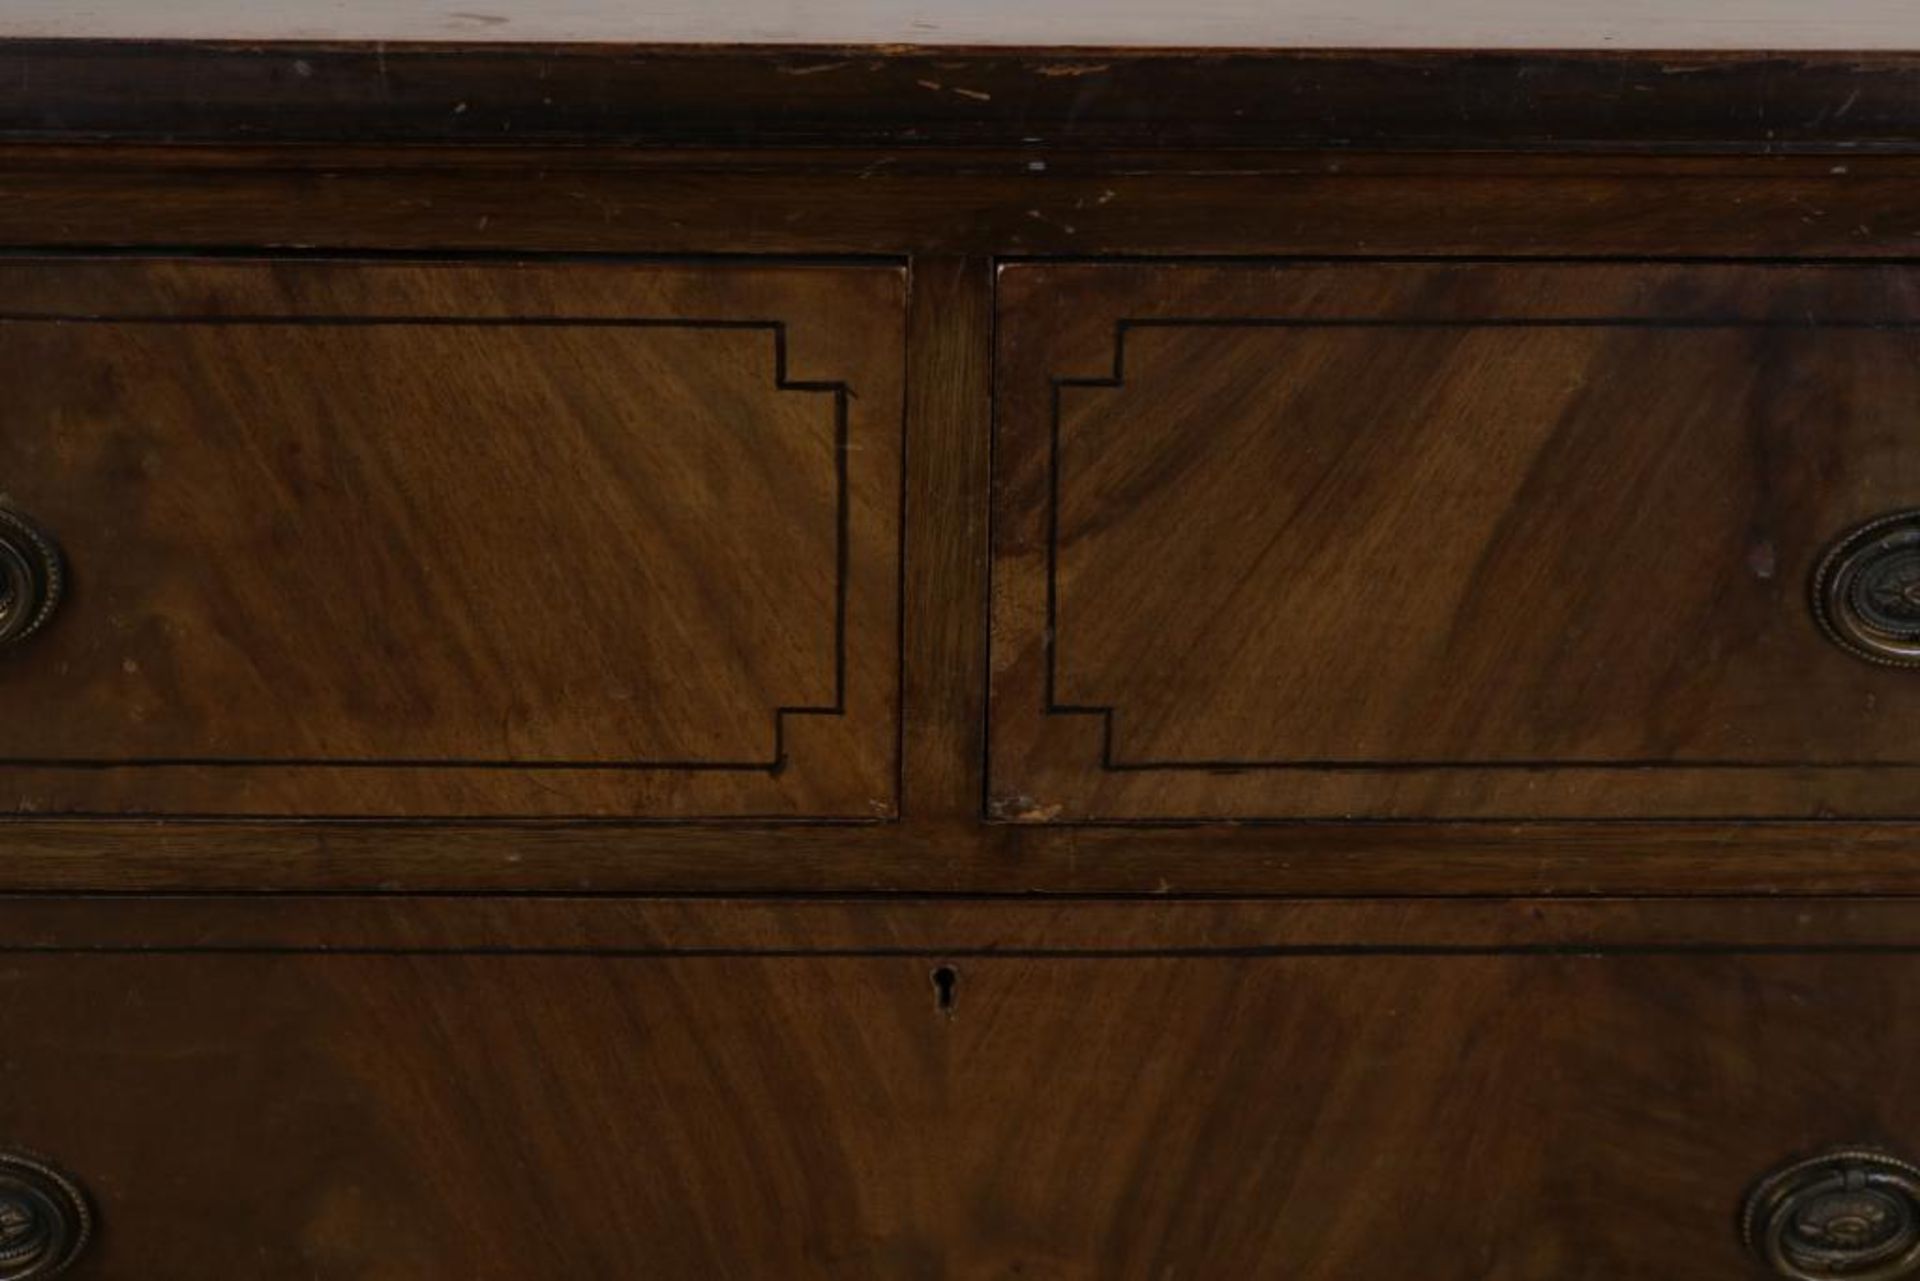 Mahogany Edwardiaan Hobbs & Co londen chest with 4 drawers, England ca. 1900. (Maple & Co) - Bild 3 aus 5